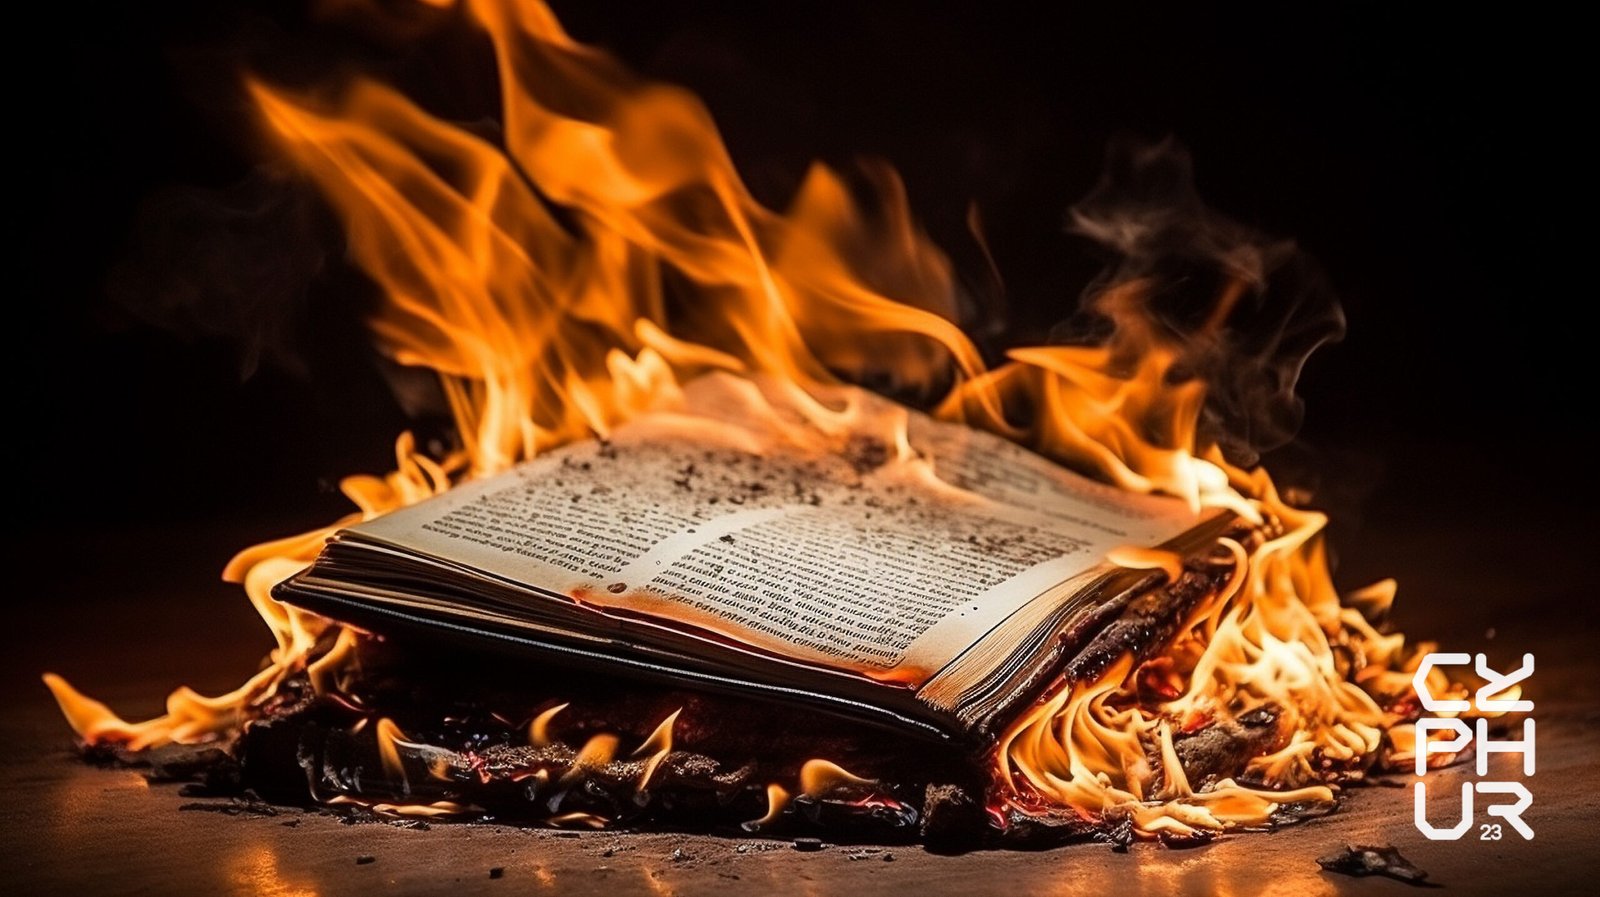 Unmasking Totalitarian Tendencies: The Alarming Obsession with Book Burning and Banning in Conservative Circles